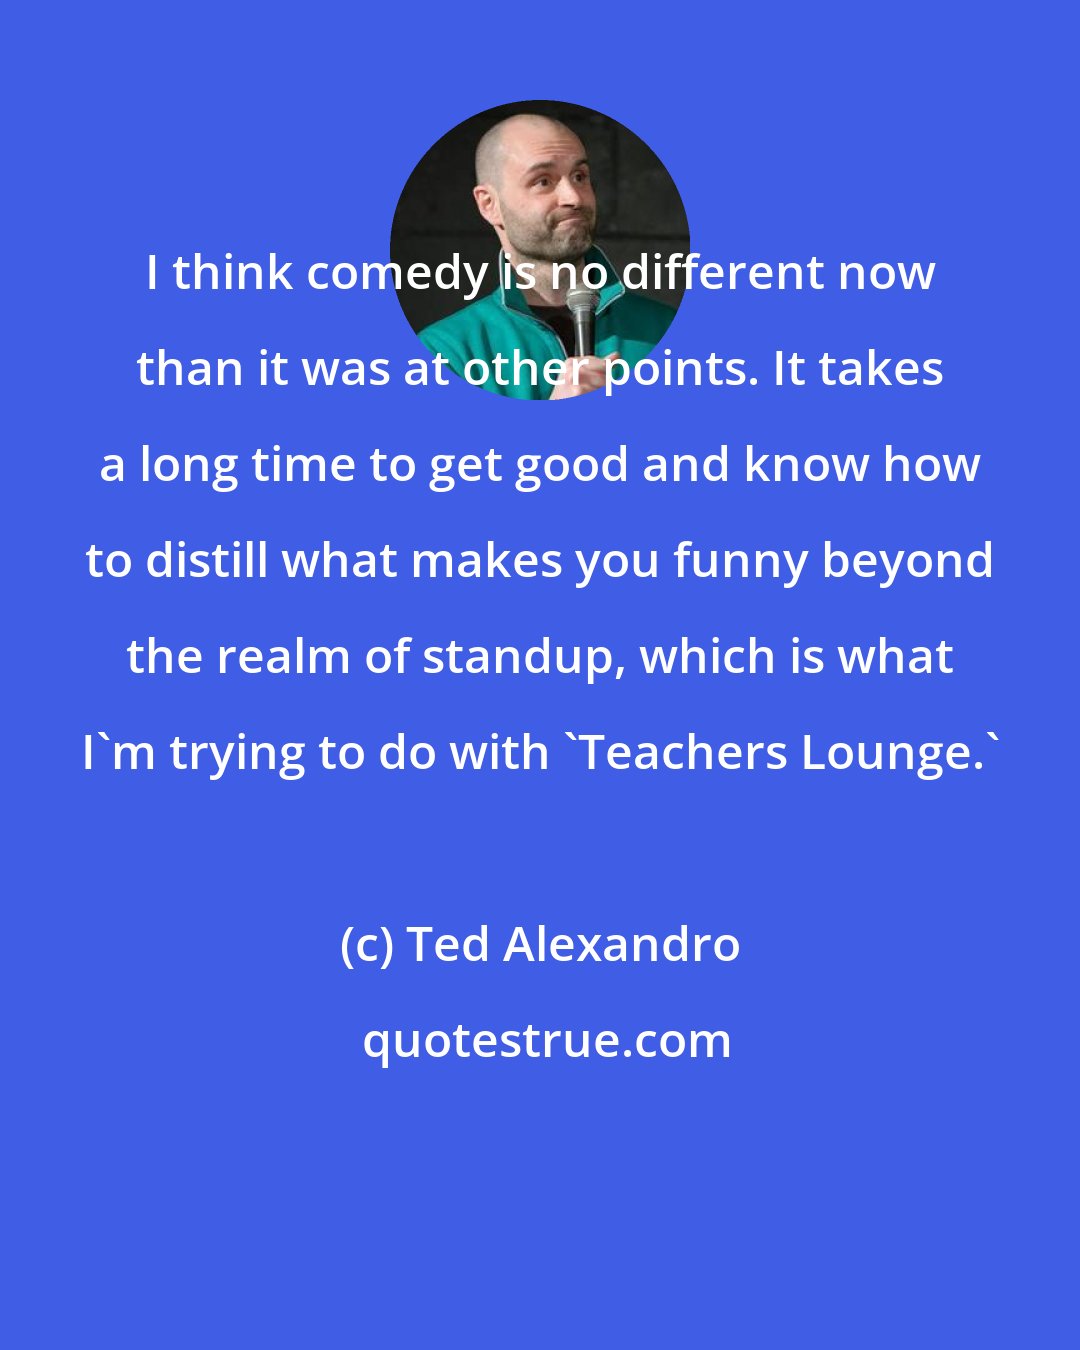 Ted Alexandro: I think comedy is no different now than it was at other points. It takes a long time to get good and know how to distill what makes you funny beyond the realm of standup, which is what I'm trying to do with 'Teachers Lounge.'